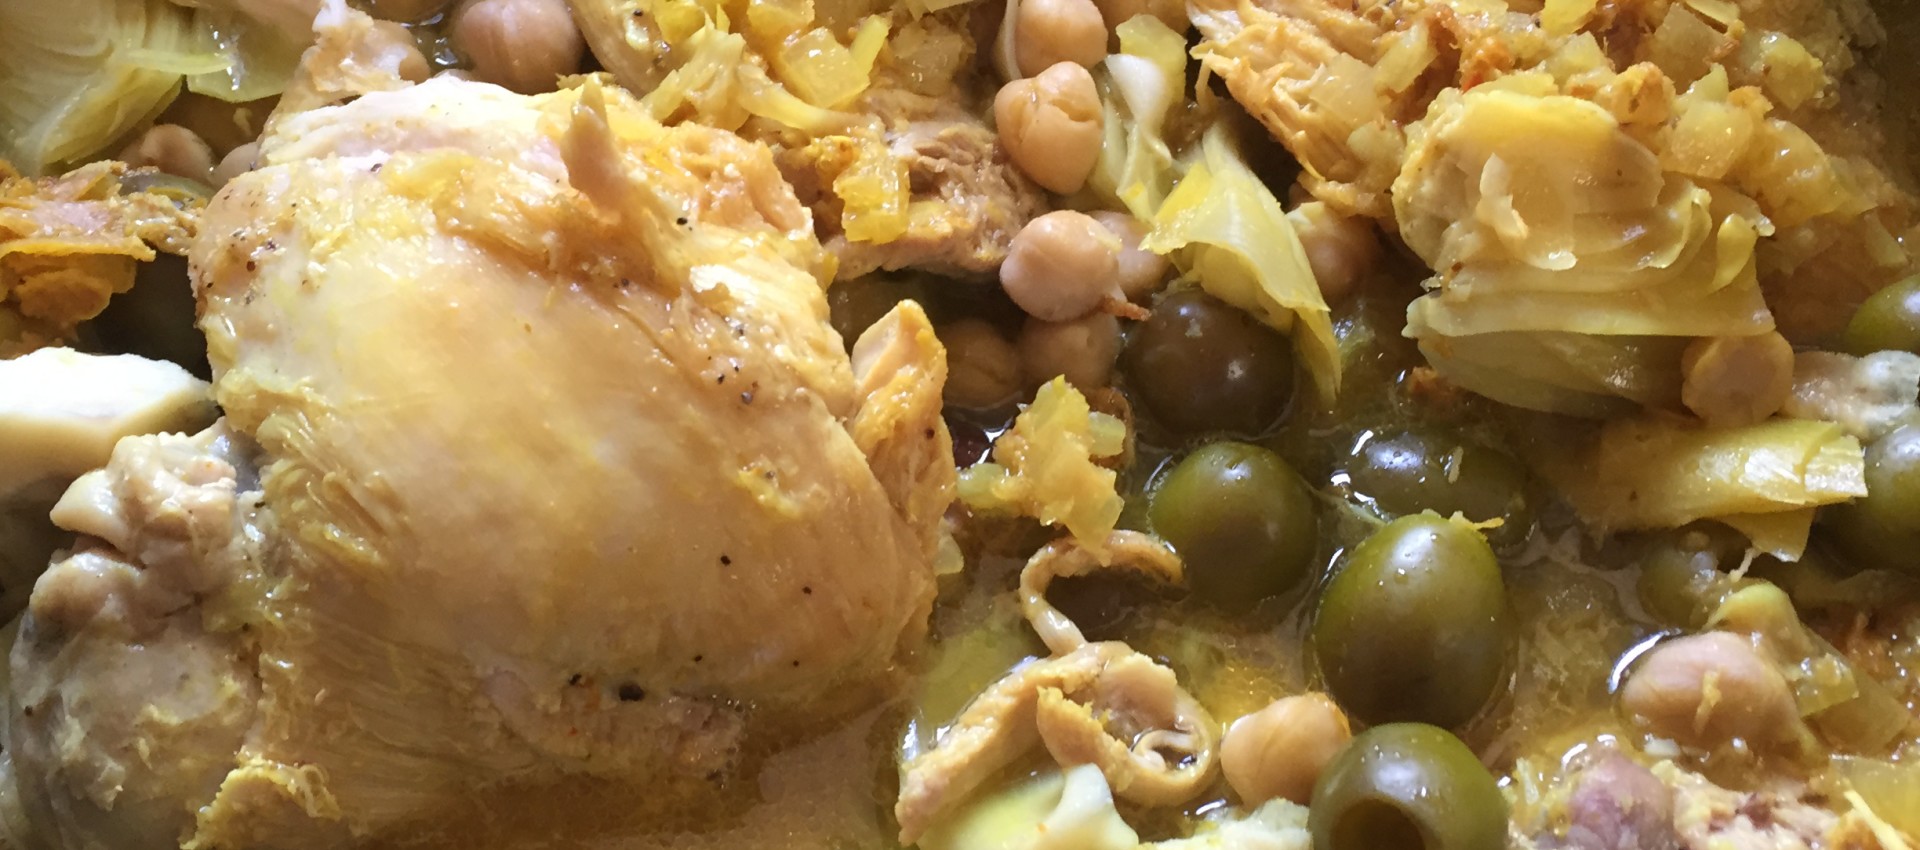 Chicken with Artichokes and Olives